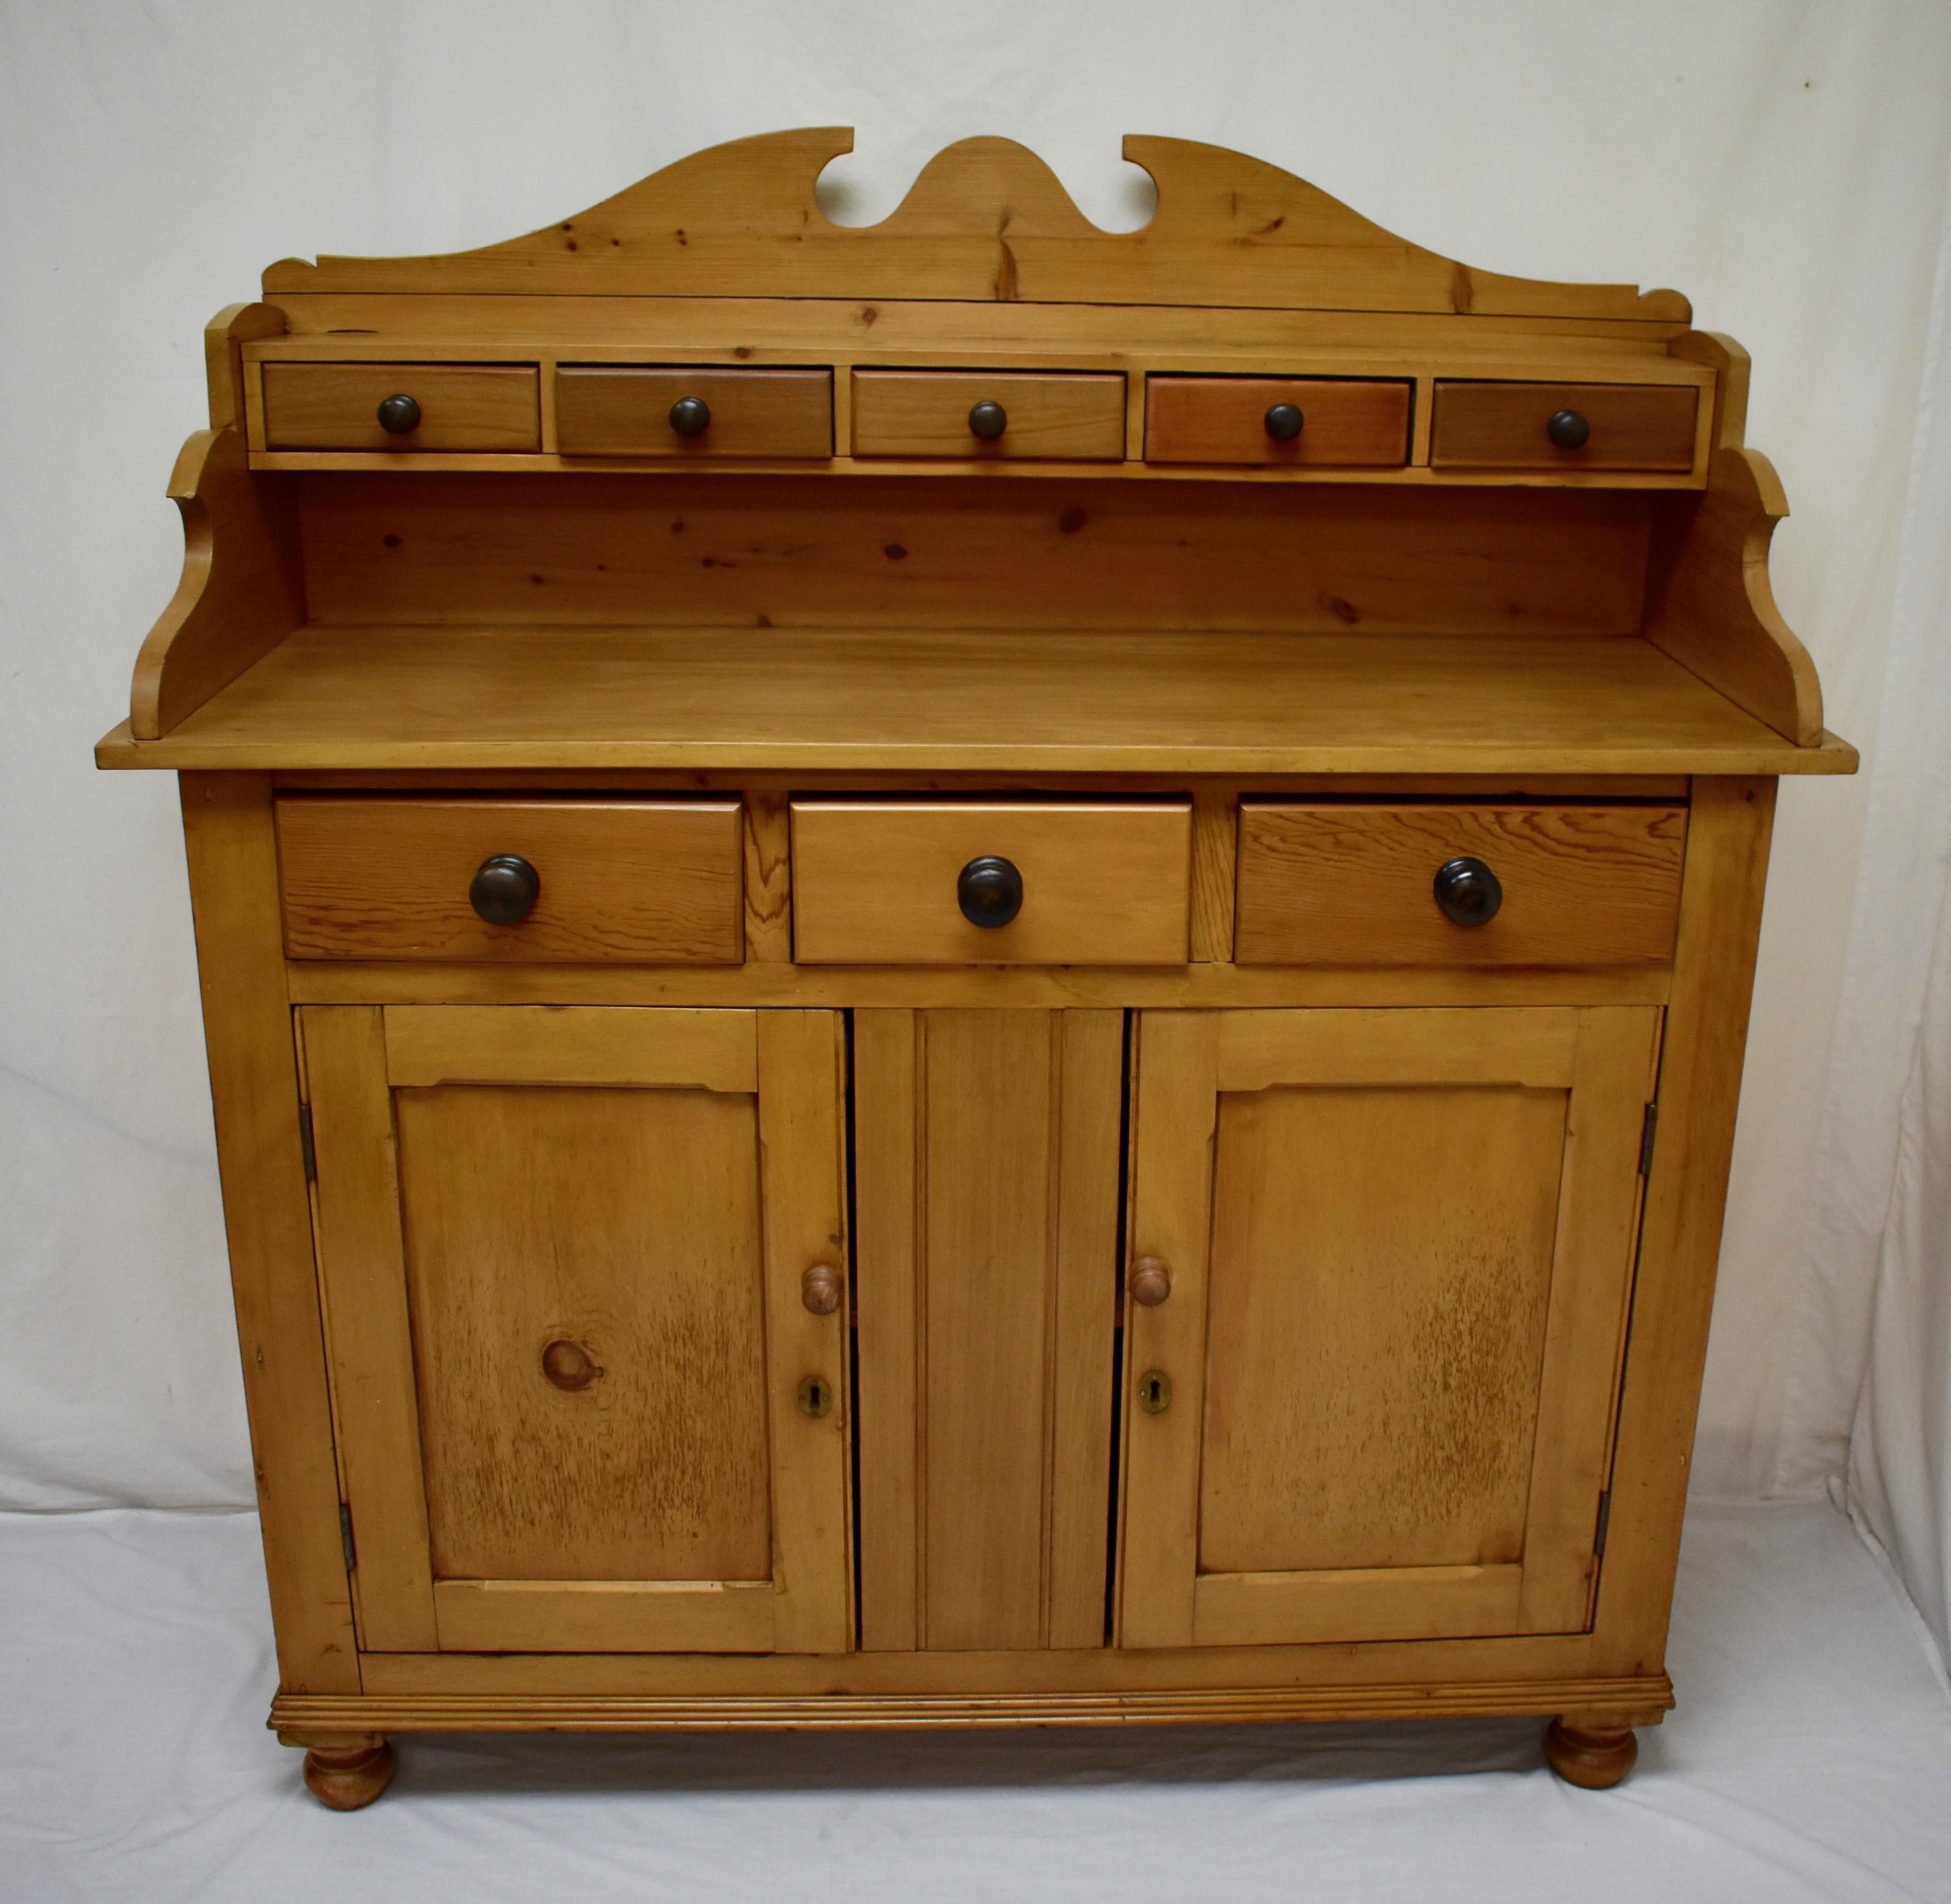 This handsome Scottish dresser features a pine gallery with a high scalloped back, housing five handcut dovetailed spice drawers, with drawer fronts and bottoms of mixed wood species. The sides are of pine “tongue and groove” boards, The base has a